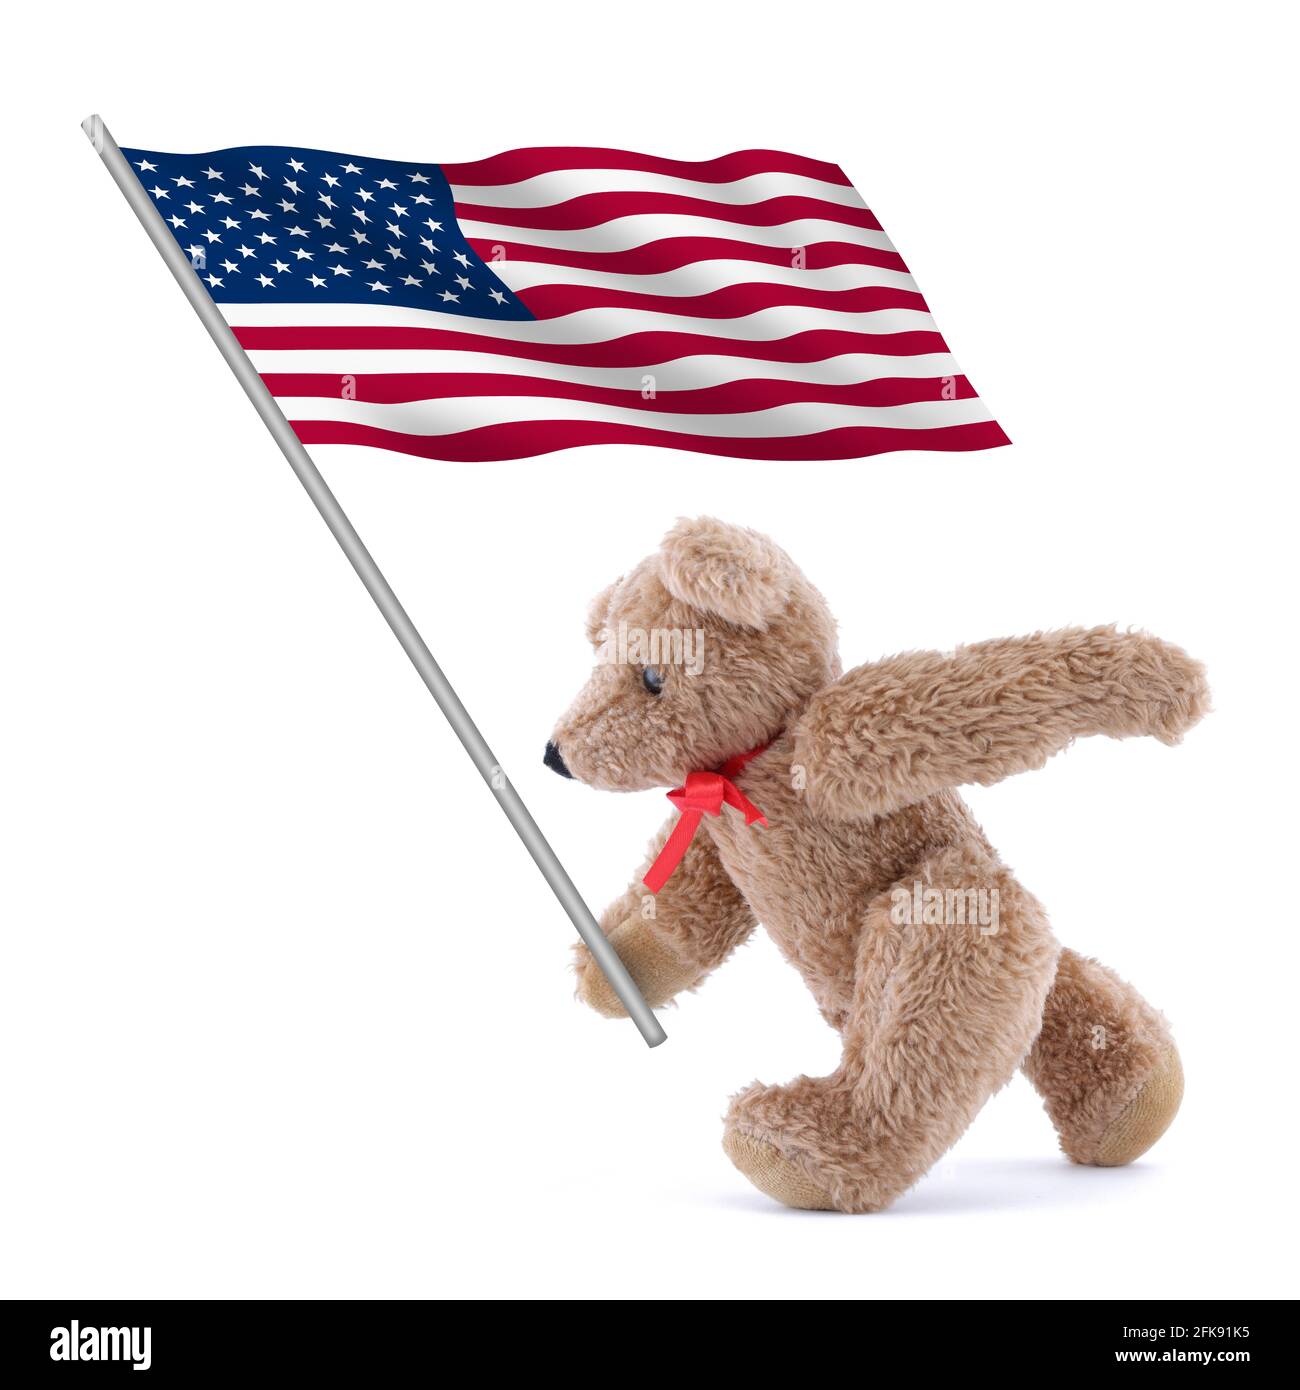 United states of America flag stars and stripes old glory being carried by a cute teddy bear Stock Photo